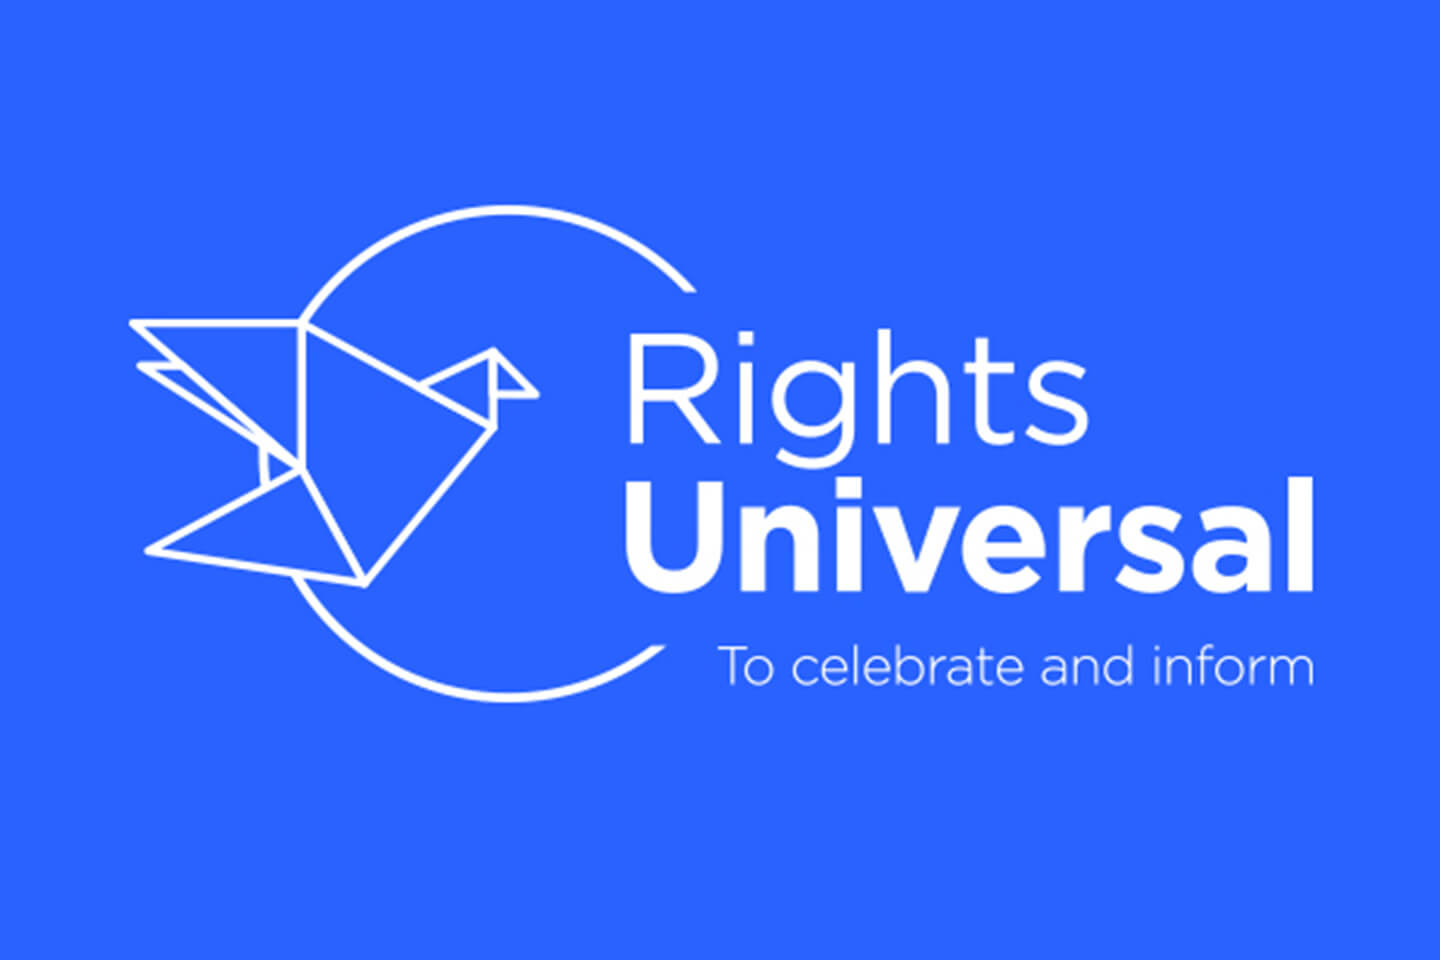 Rights Universal